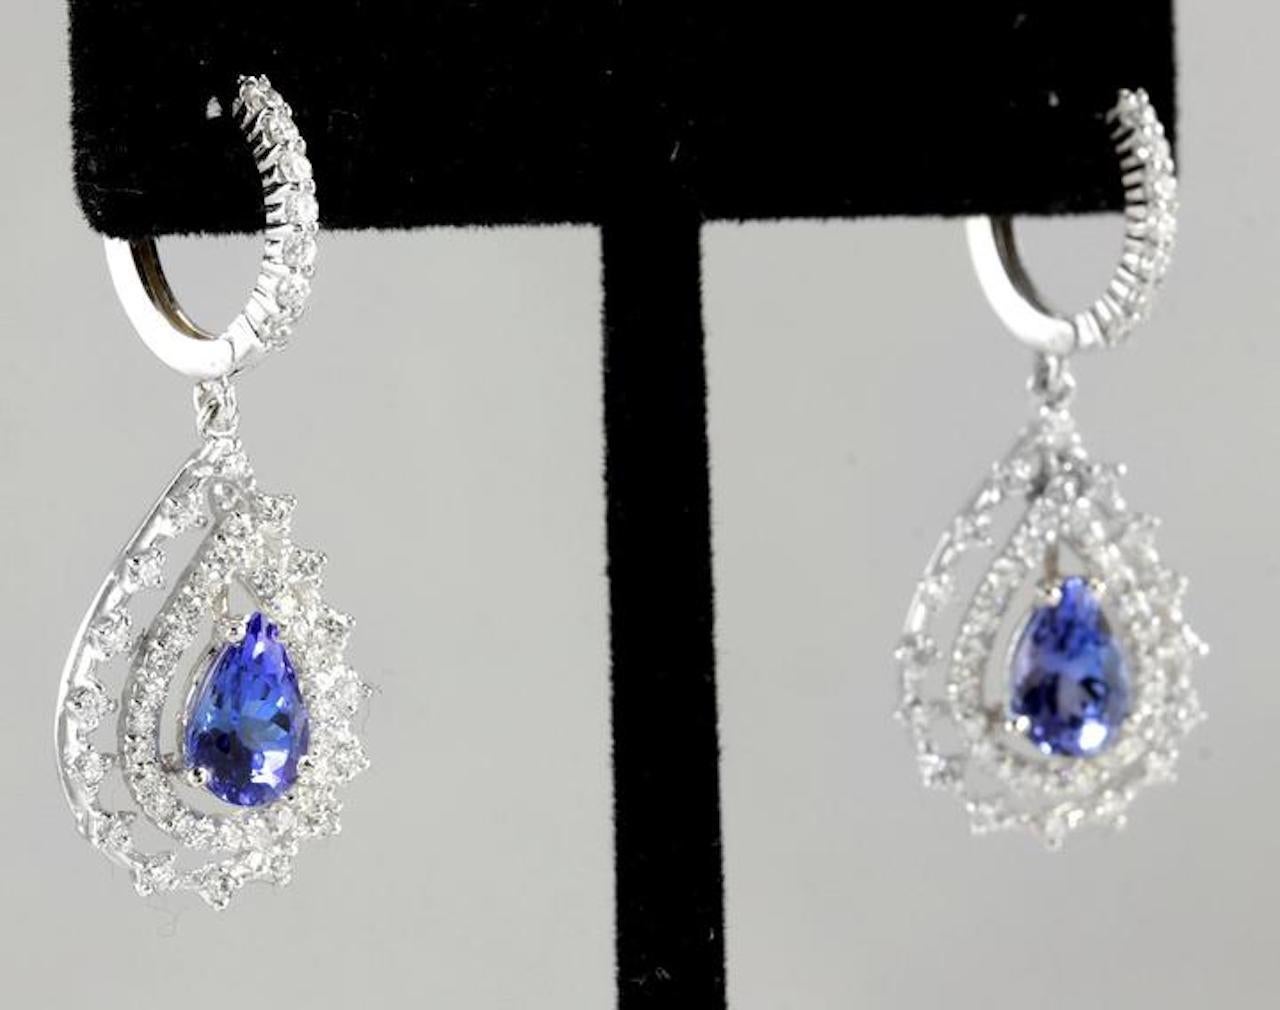 Exquisite 6.00 Carats Natural Tanzanite and Diamond 14K Solid White Gold Stud Earrings

Amazing looking piece!

Total Natural Round Cut White Diamonds Weight: 2.50Carats (color F-G / Clarity VS2-SI1)

Total Natural Round Cut Tanzanites Weight: 3.50